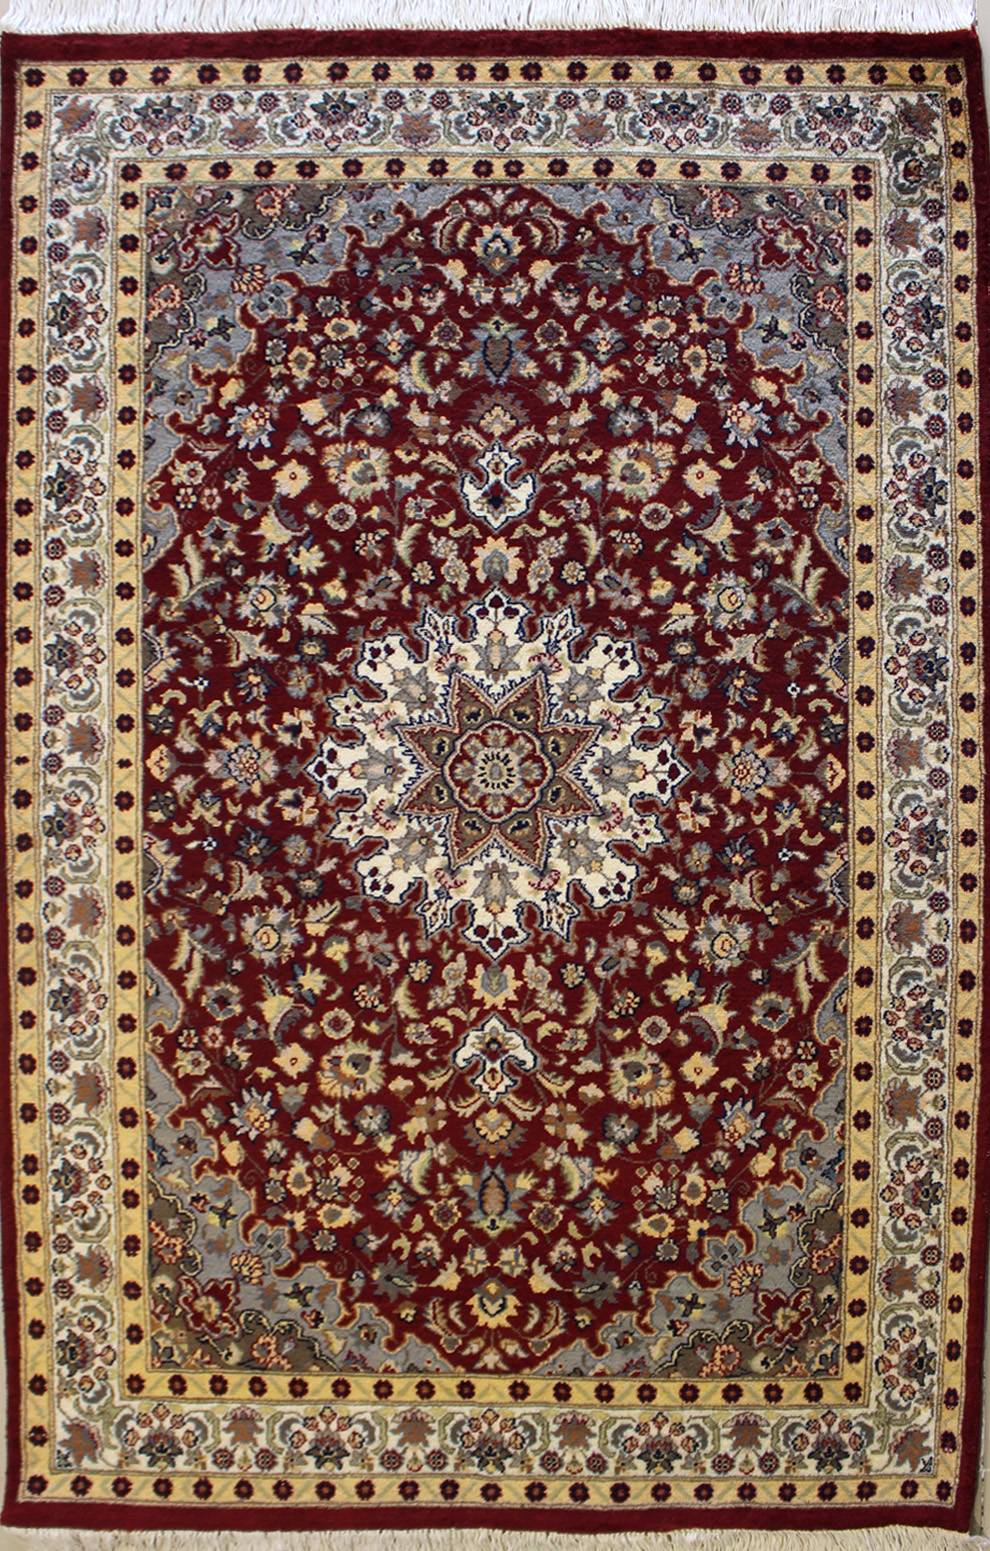 4'0"x6'6" Floral Design Red, Rust Color